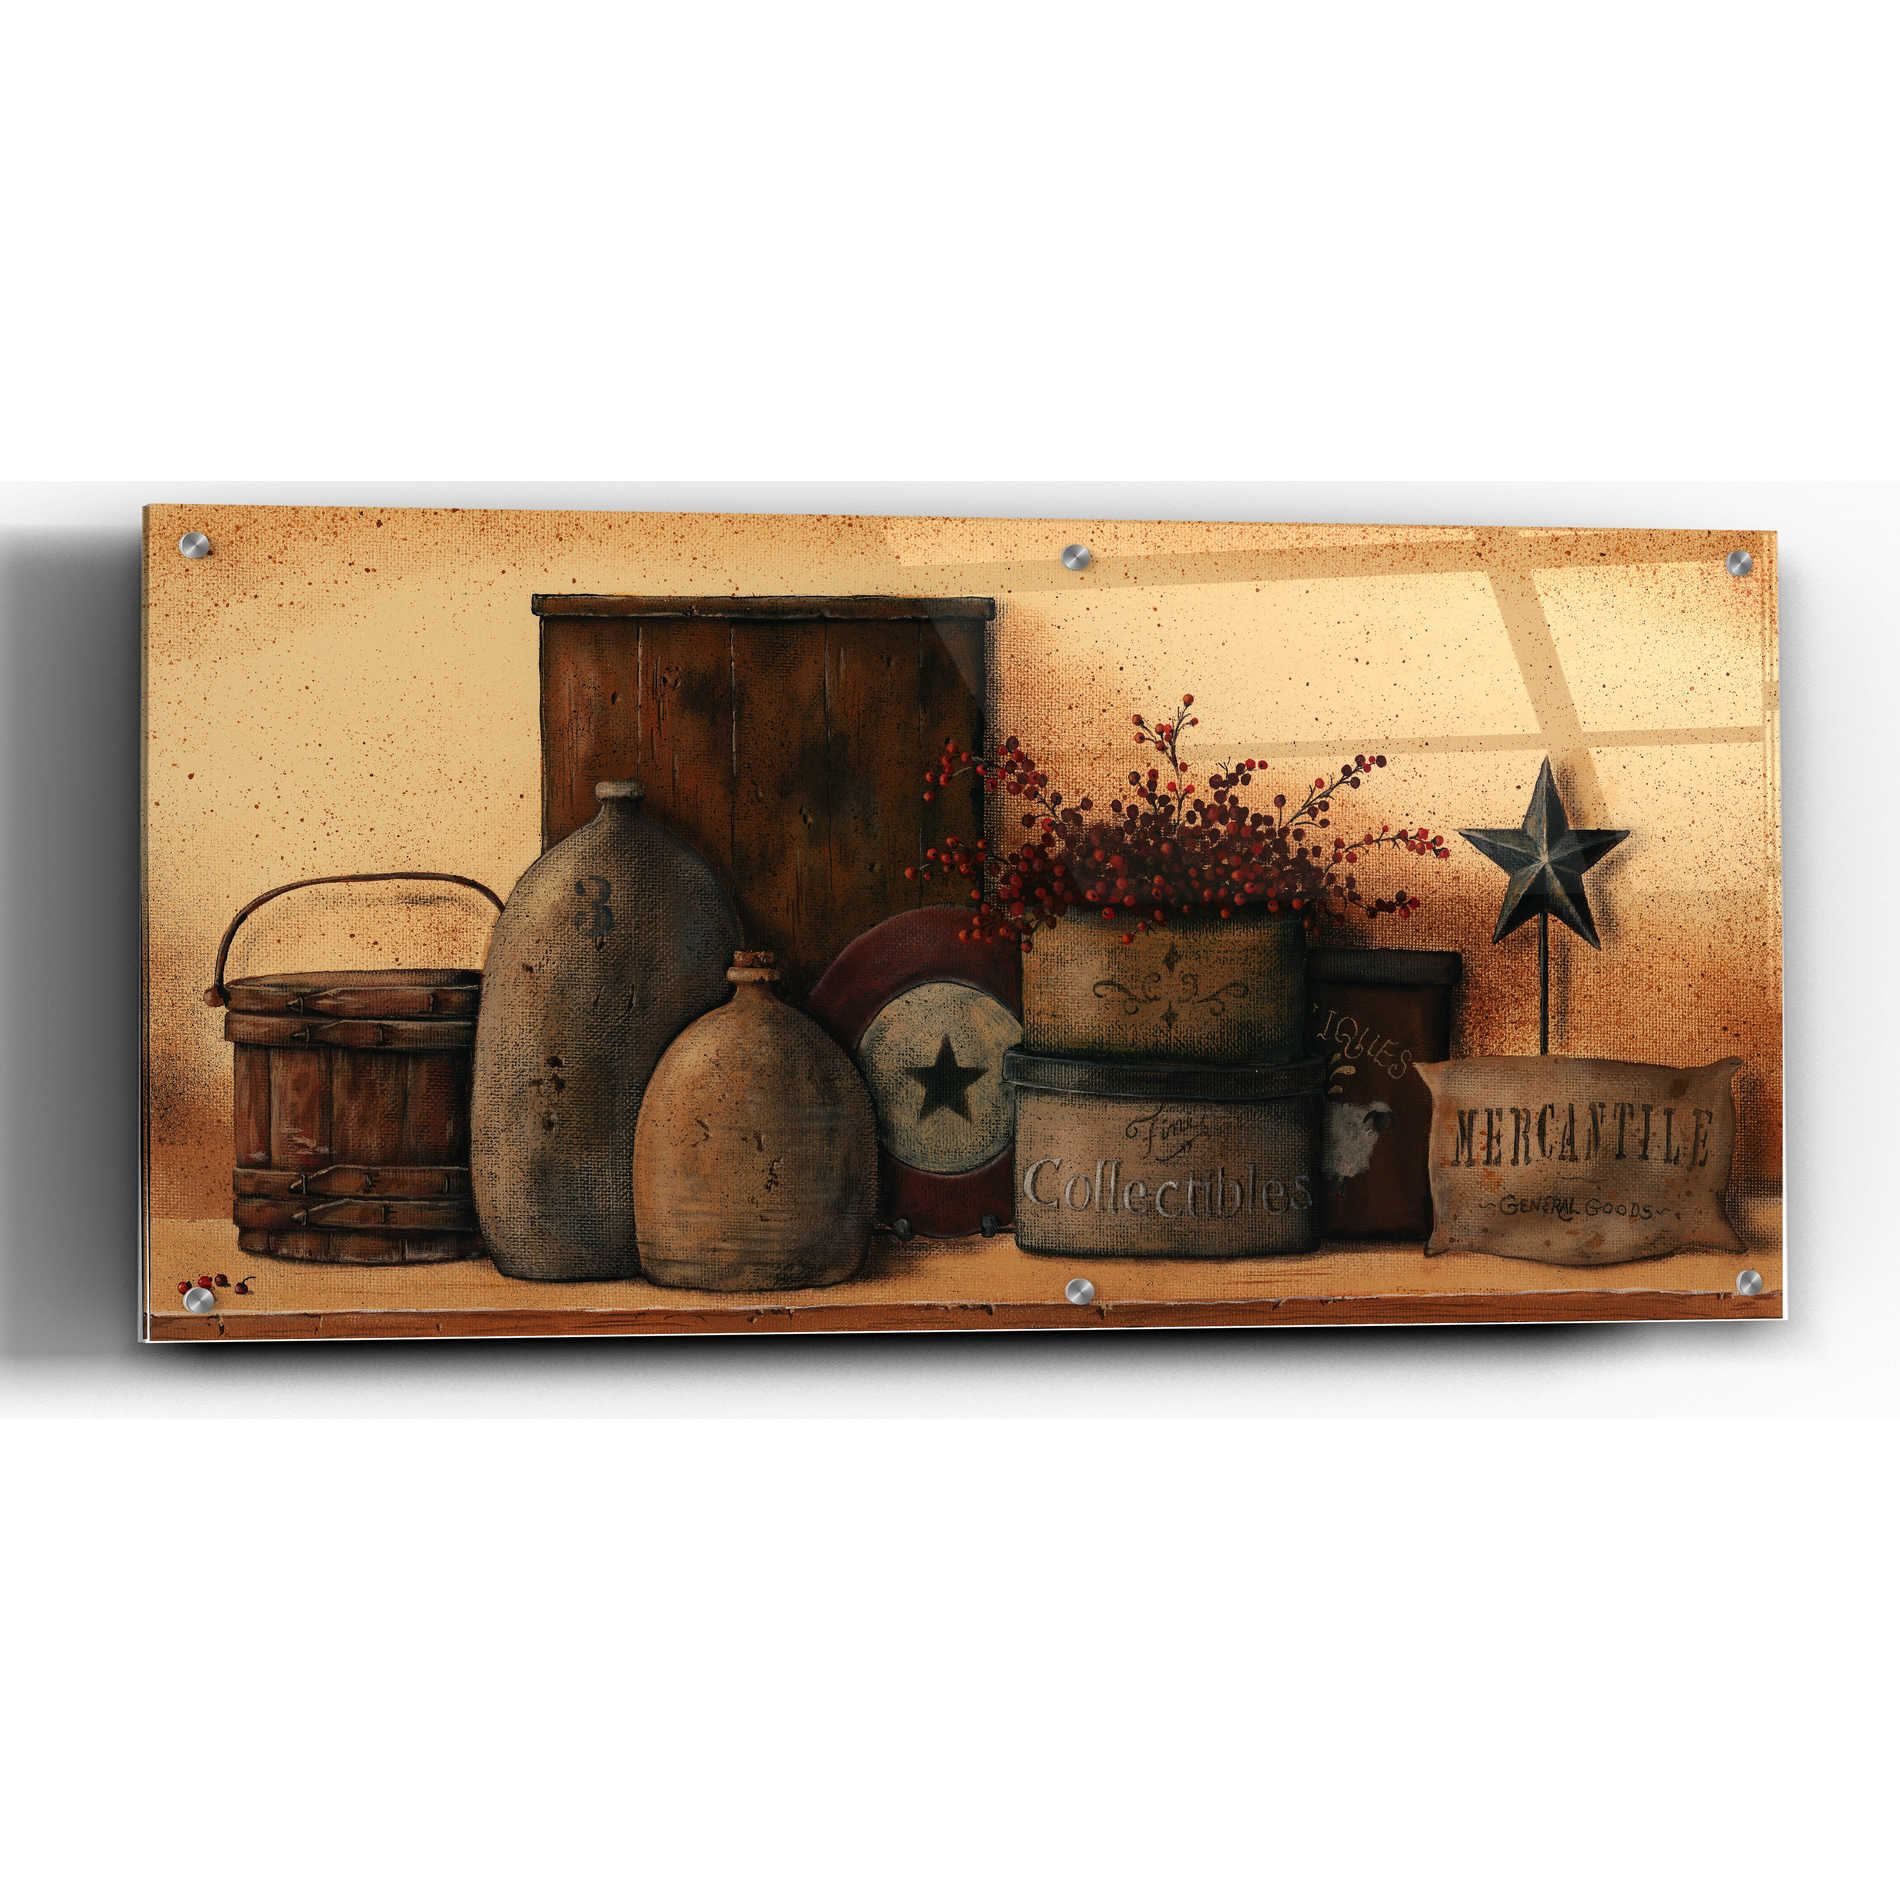 Epic Art 'Antique Treasures I' by Pam Britton, Acrylic Glass Wall Art,48x24